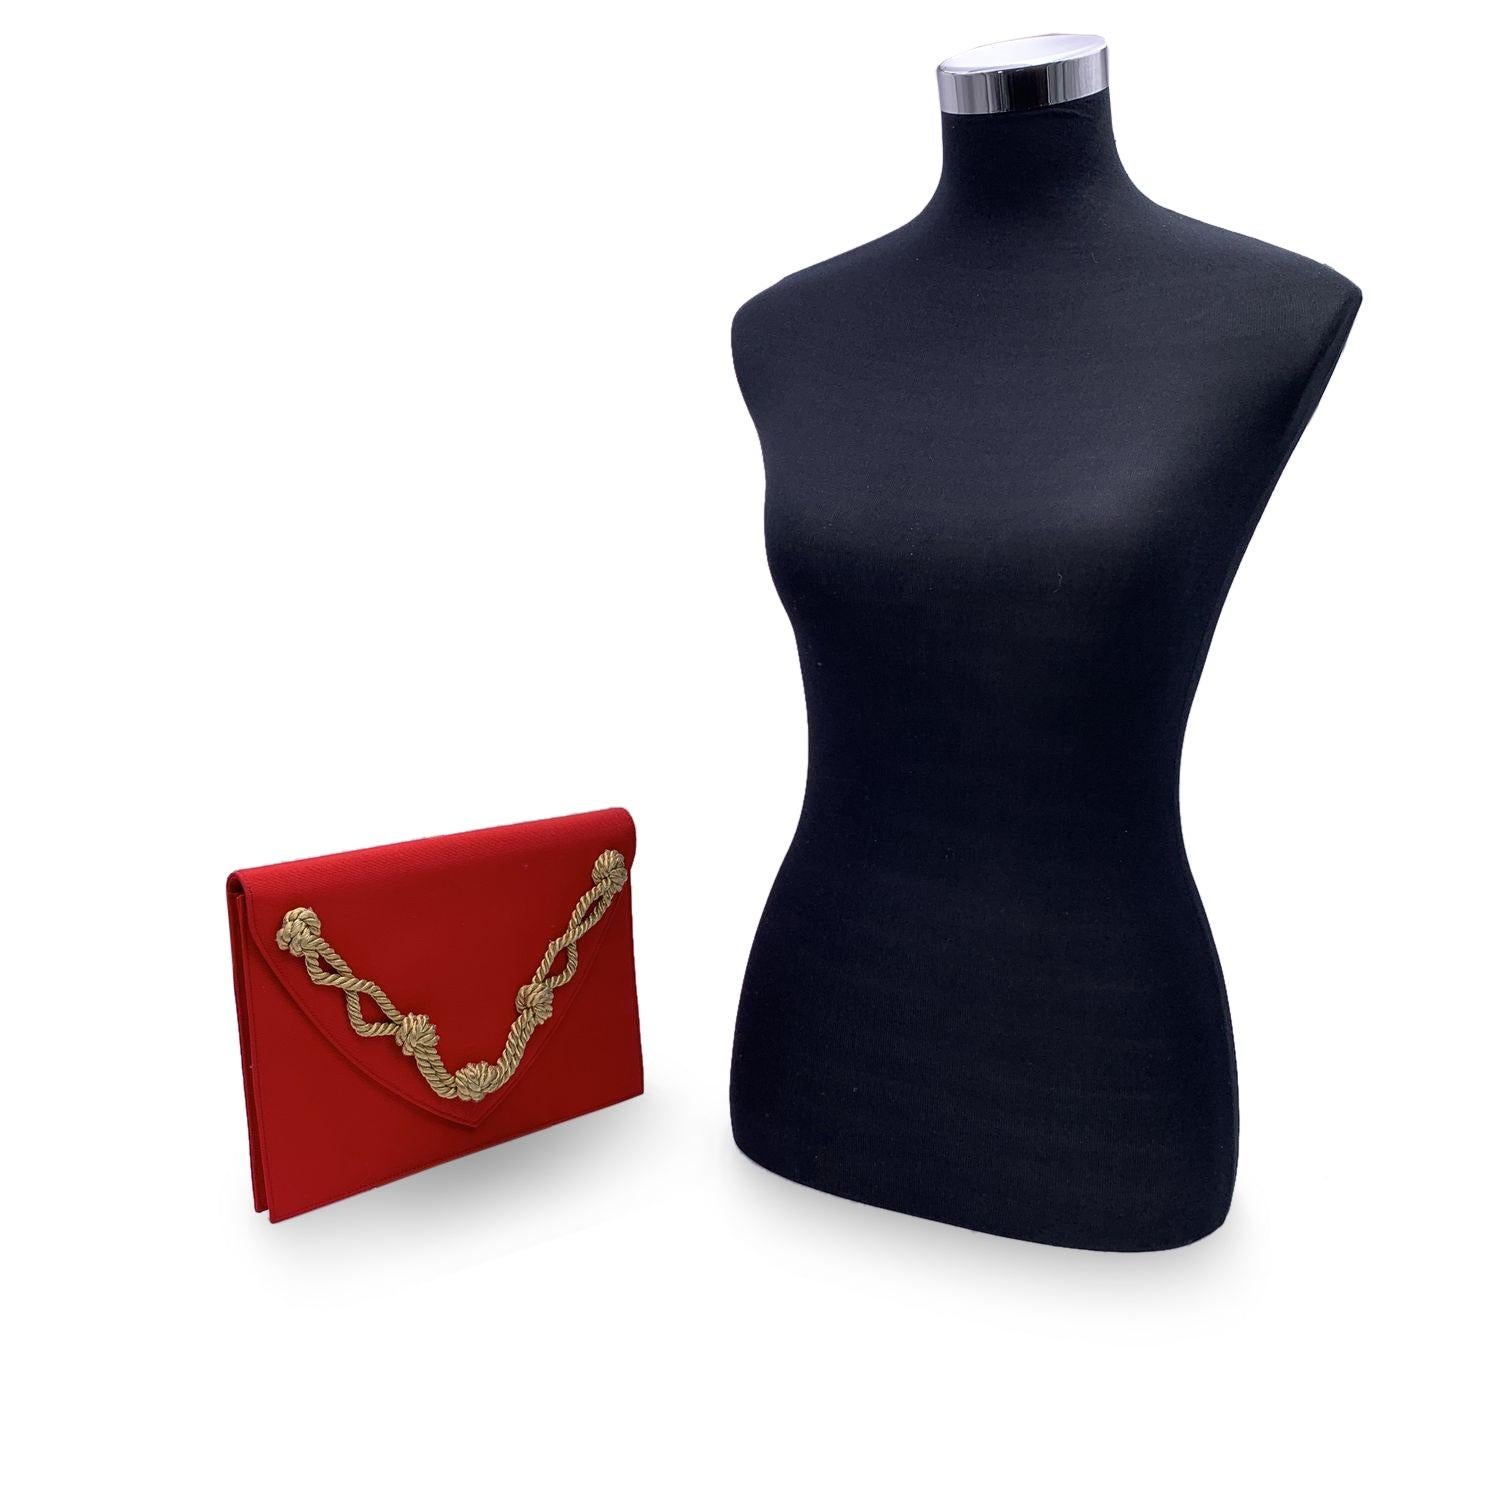 Yves Saint Laurent vintage clutch bag, crafted in red gros-grain fabric. Beutiful gold tone knotted cord on the flap. It features a flap with magnetic button closure on the front. Fabric lining. 1 side zip pocket and 1 side open pocket inside. 'YVES